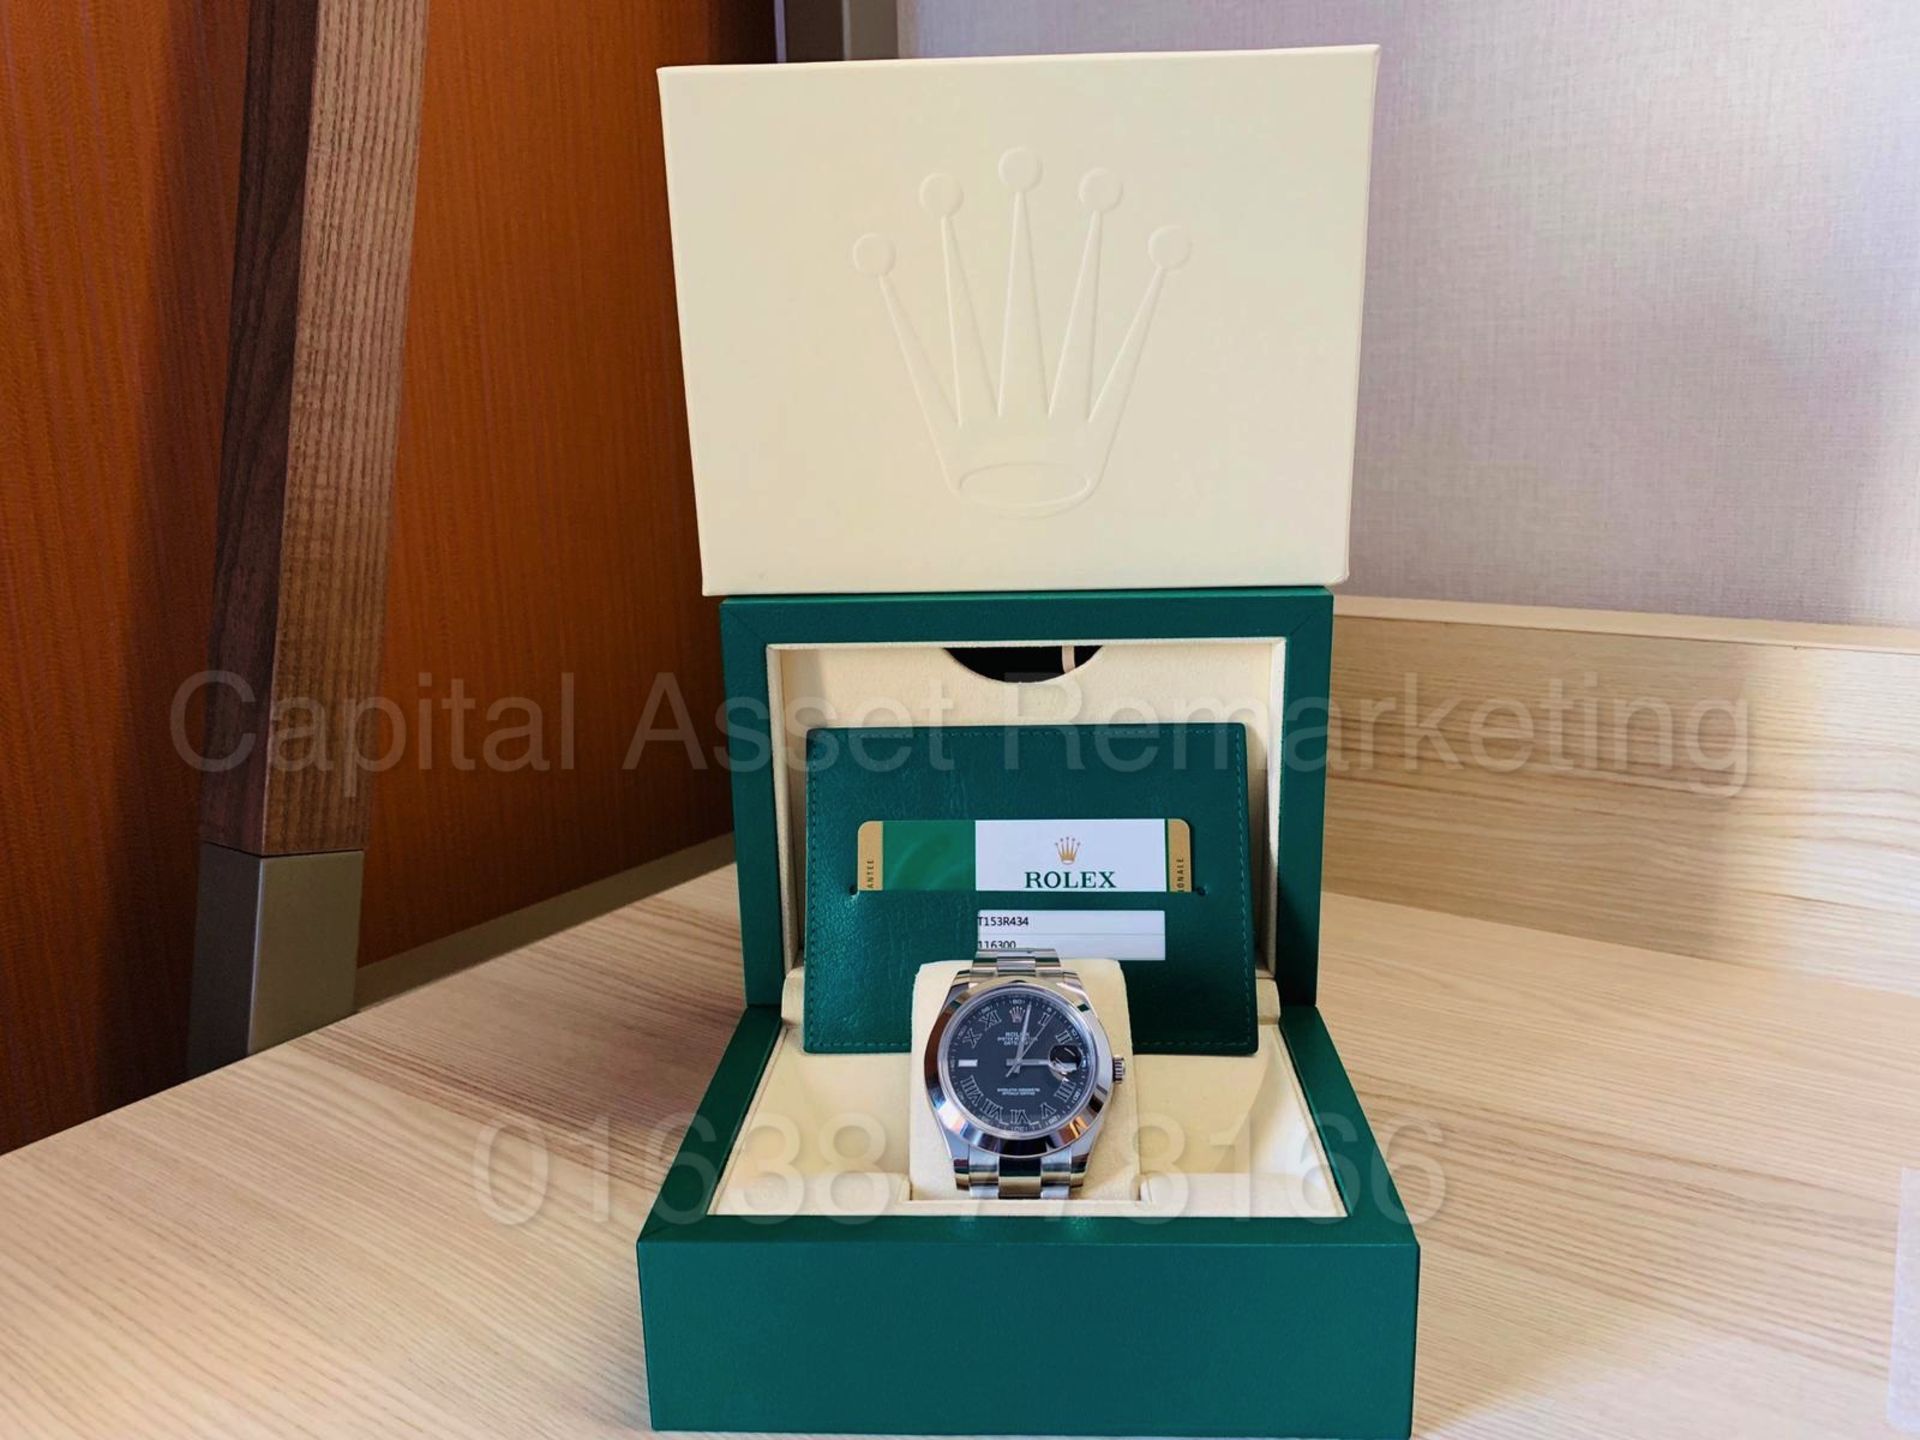 (ON SALE) ROLEX OYSTER PERPETUAL *41MM DATEJUST* (BRAND NEW / UN-WORN) *GENUINE* (PAPERWORK & BOX) - Image 14 of 15